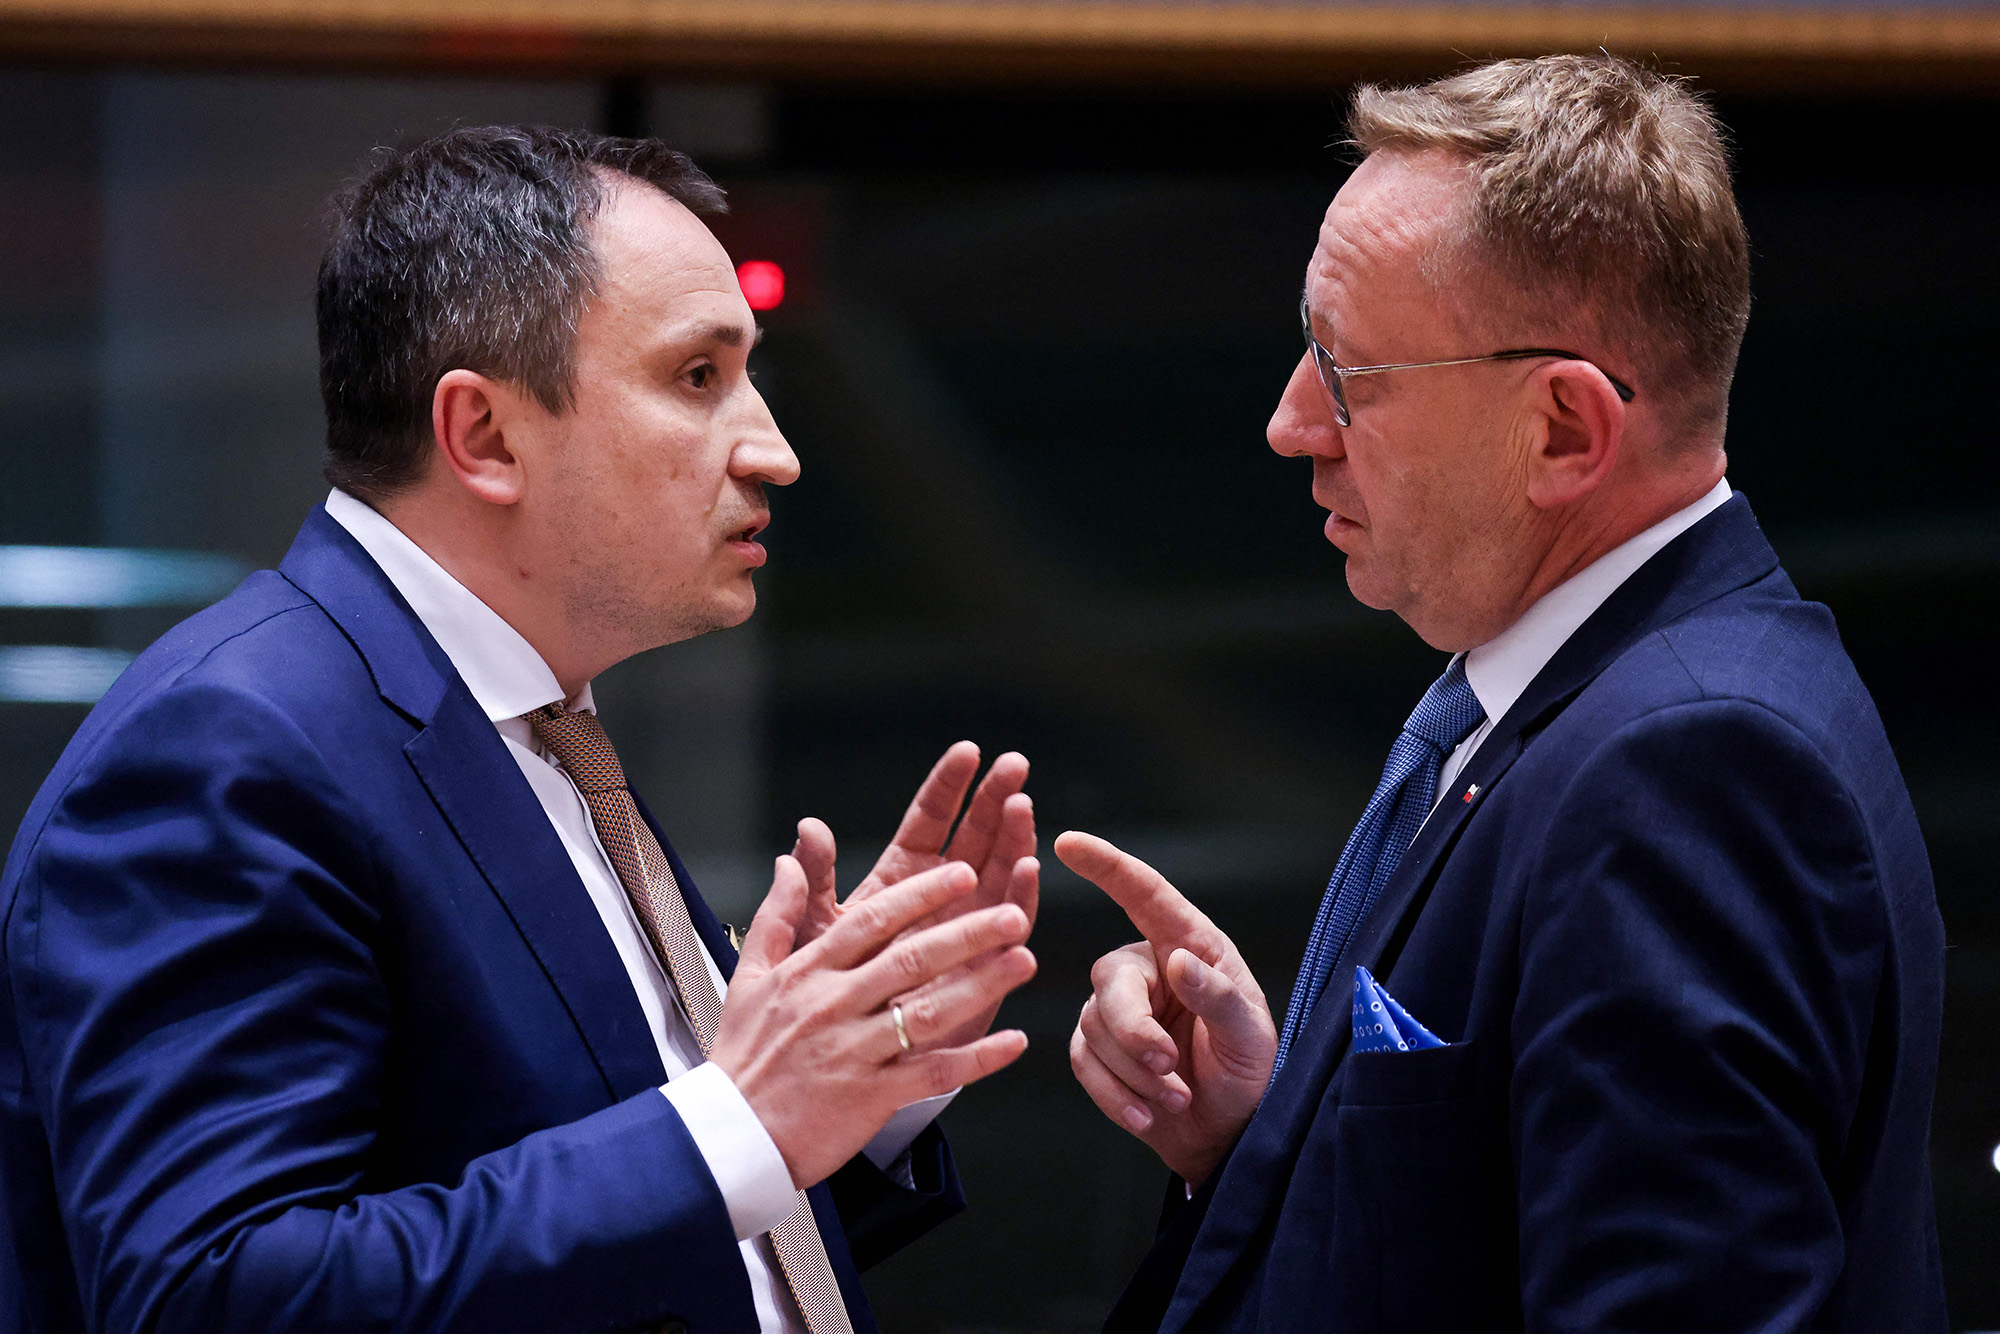 Ukraine's Minister of Agrarian Policy and Food, Mykola Solskyi, left, speaks with Poland's Minister for Agriculture, Robert Telus at the EU headquarters in Brussels, Belgium, on May 30.